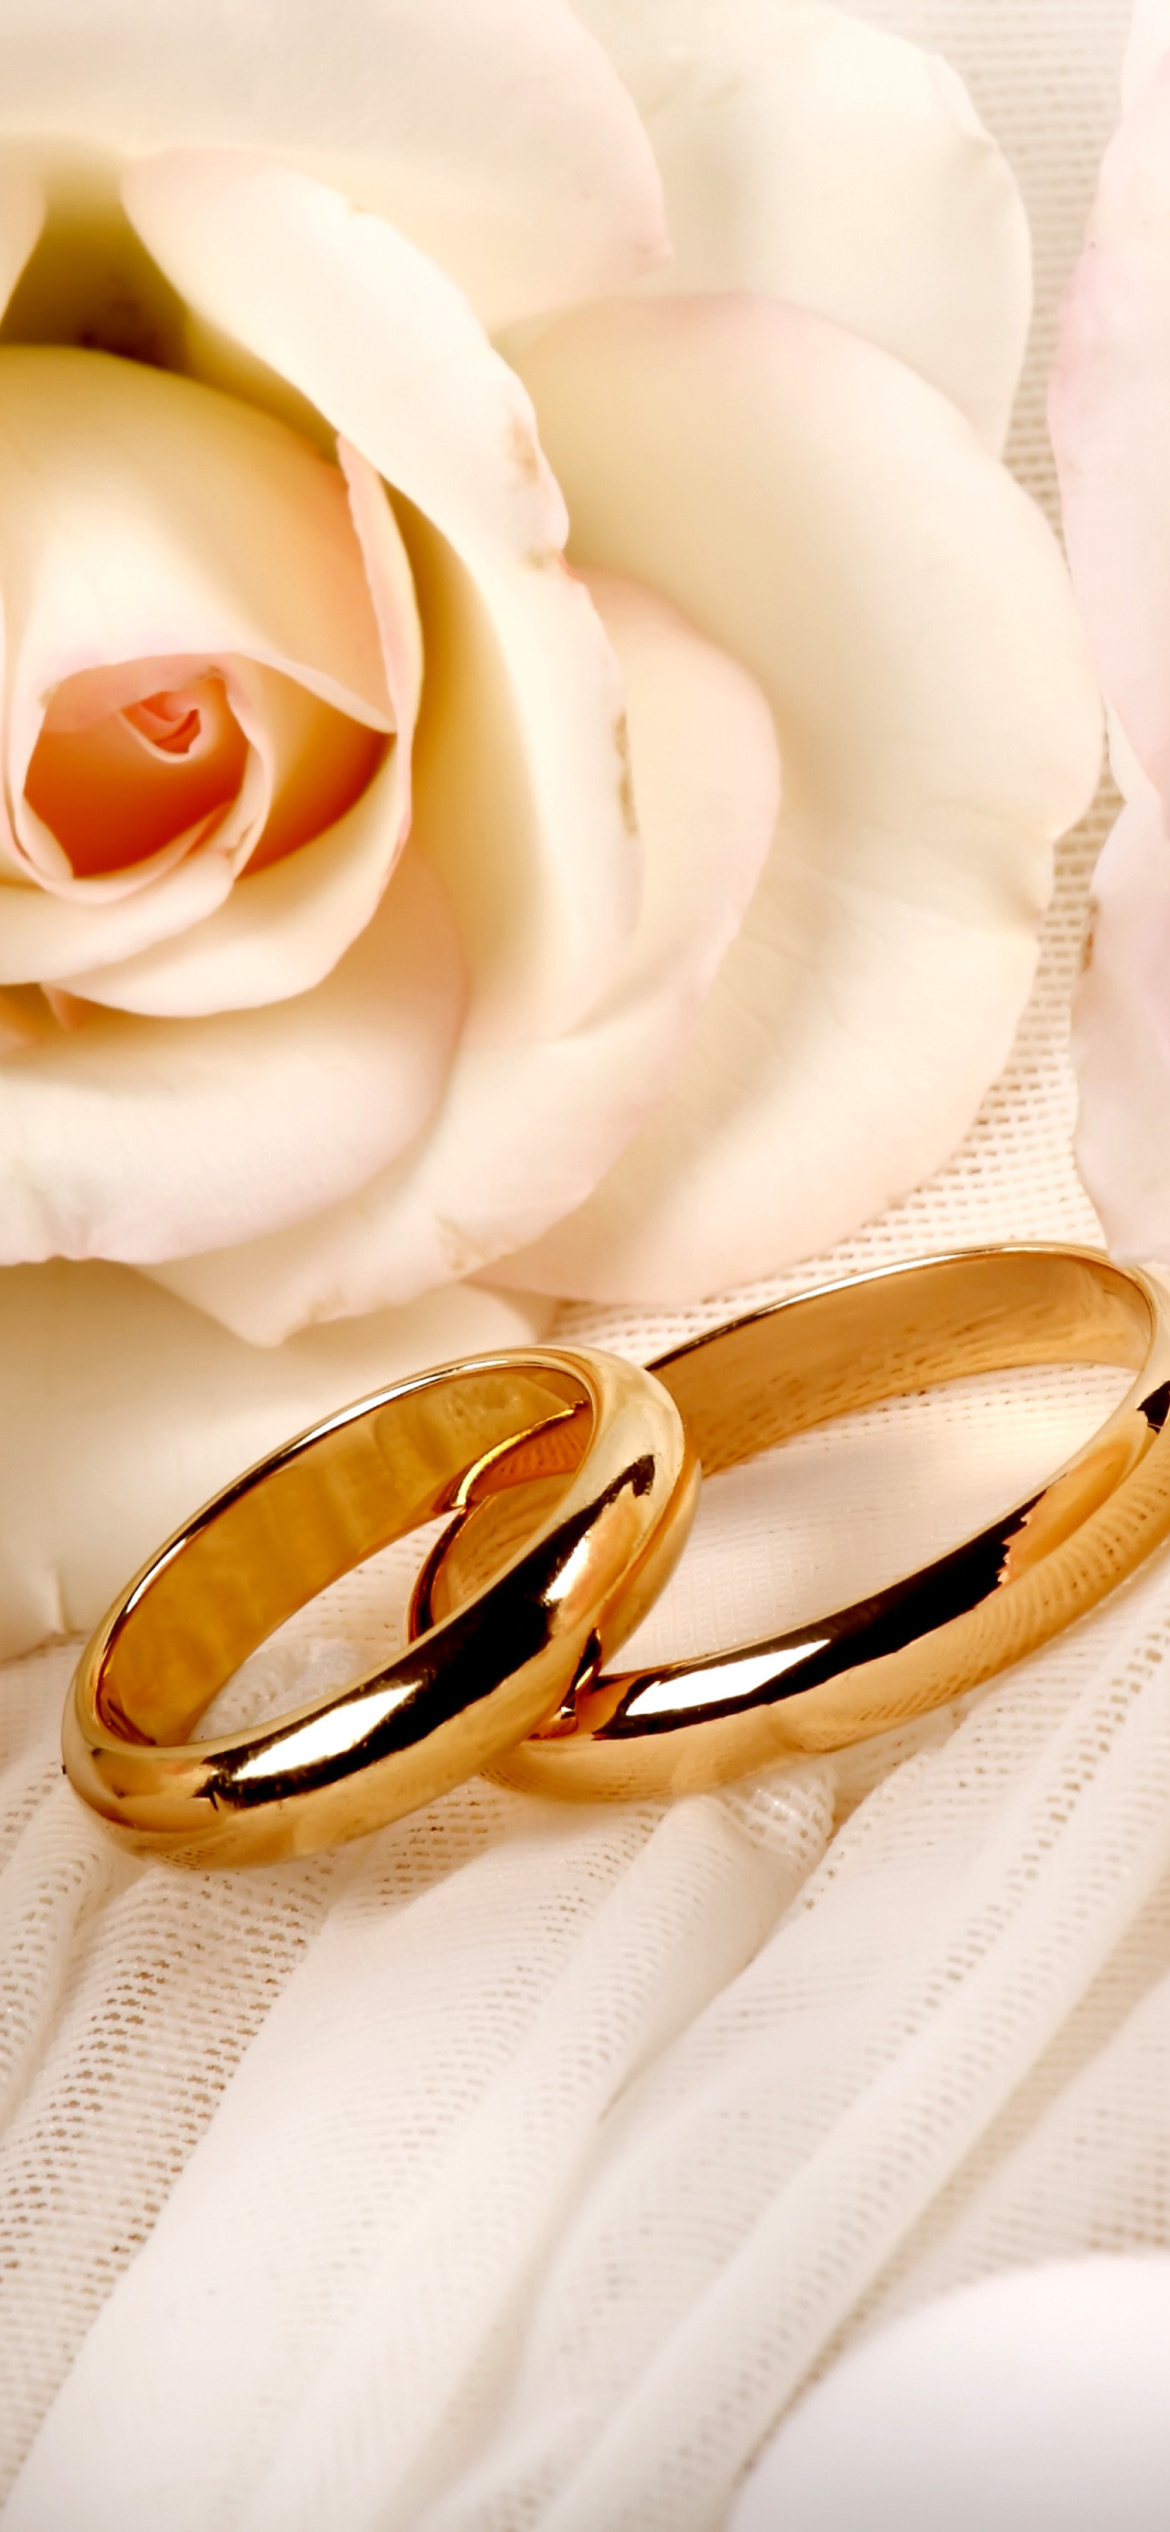 Roses And Wedding Rings Wallpaper For iPhone